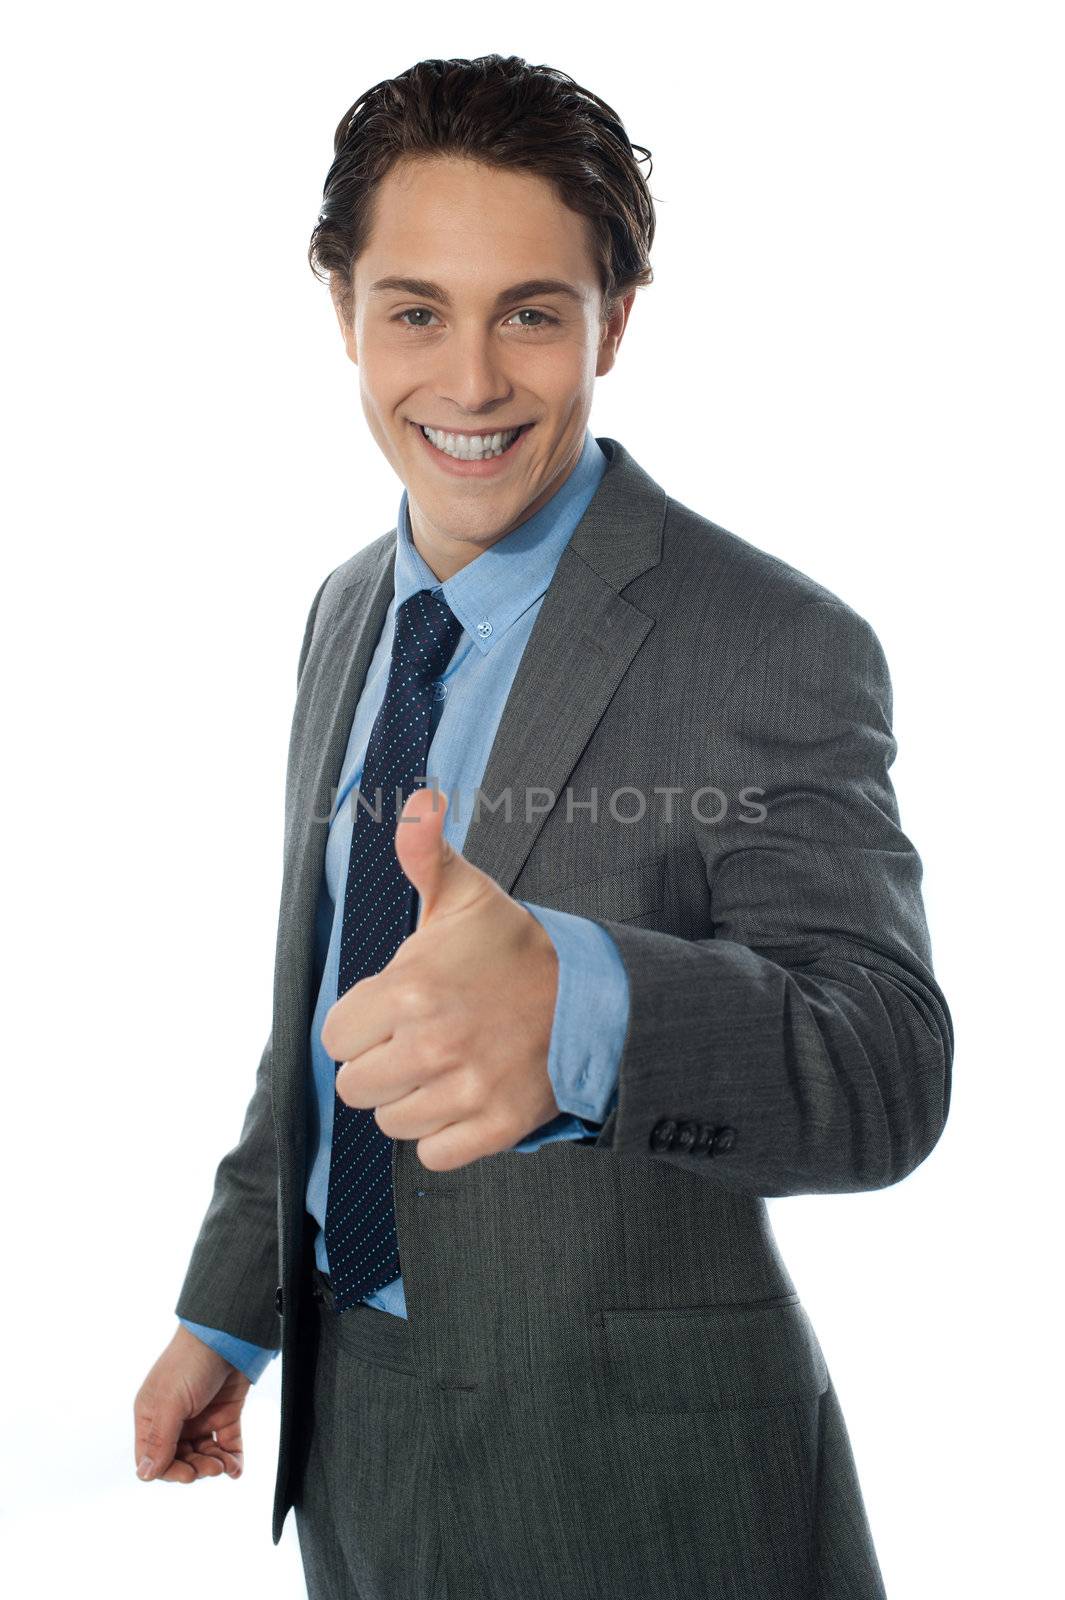 Corporate man showing thumbs up sign with smile